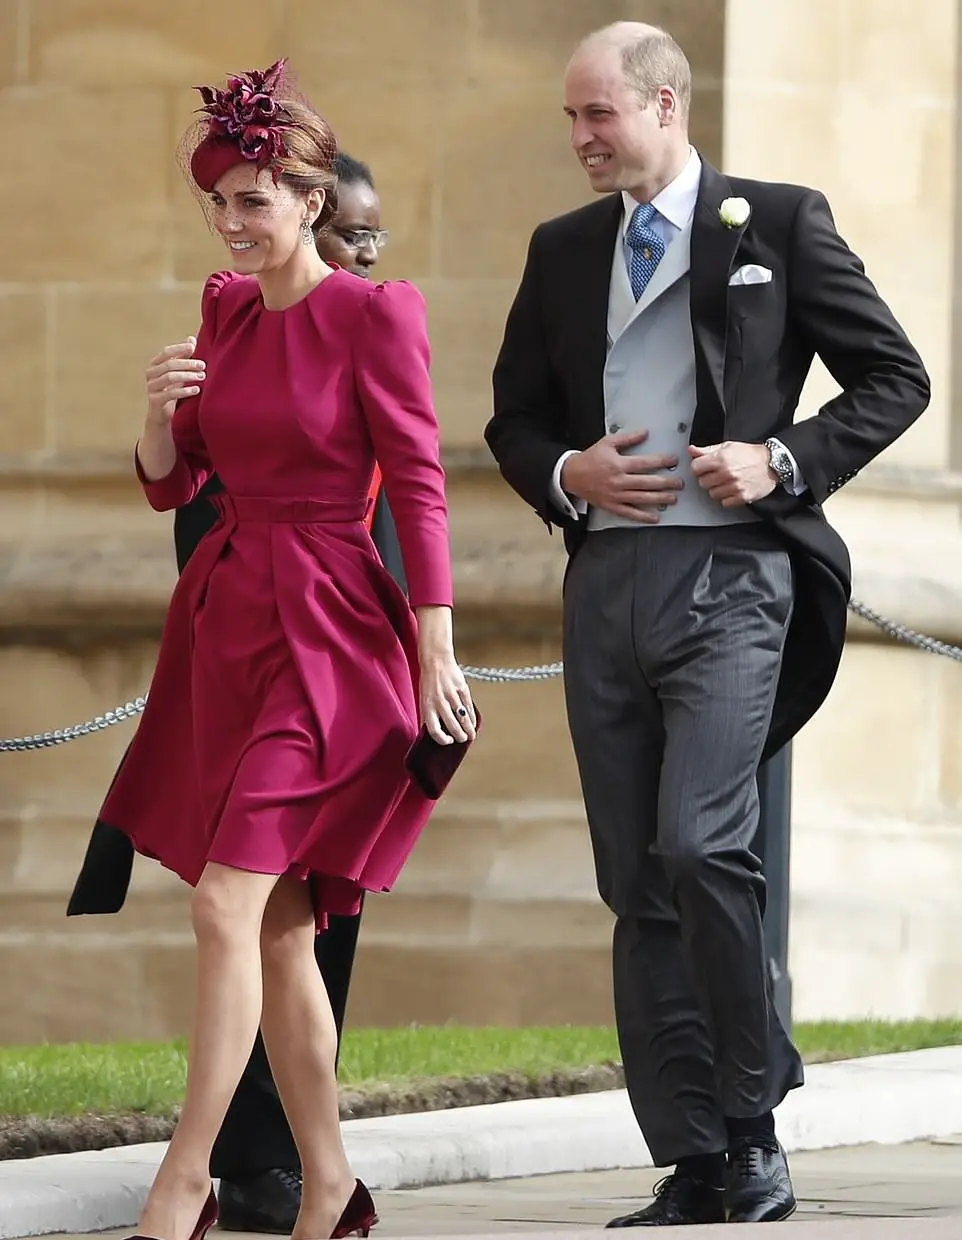 Duke and Duchess of Cambridge arrived at the wedding of Princess Eugenie